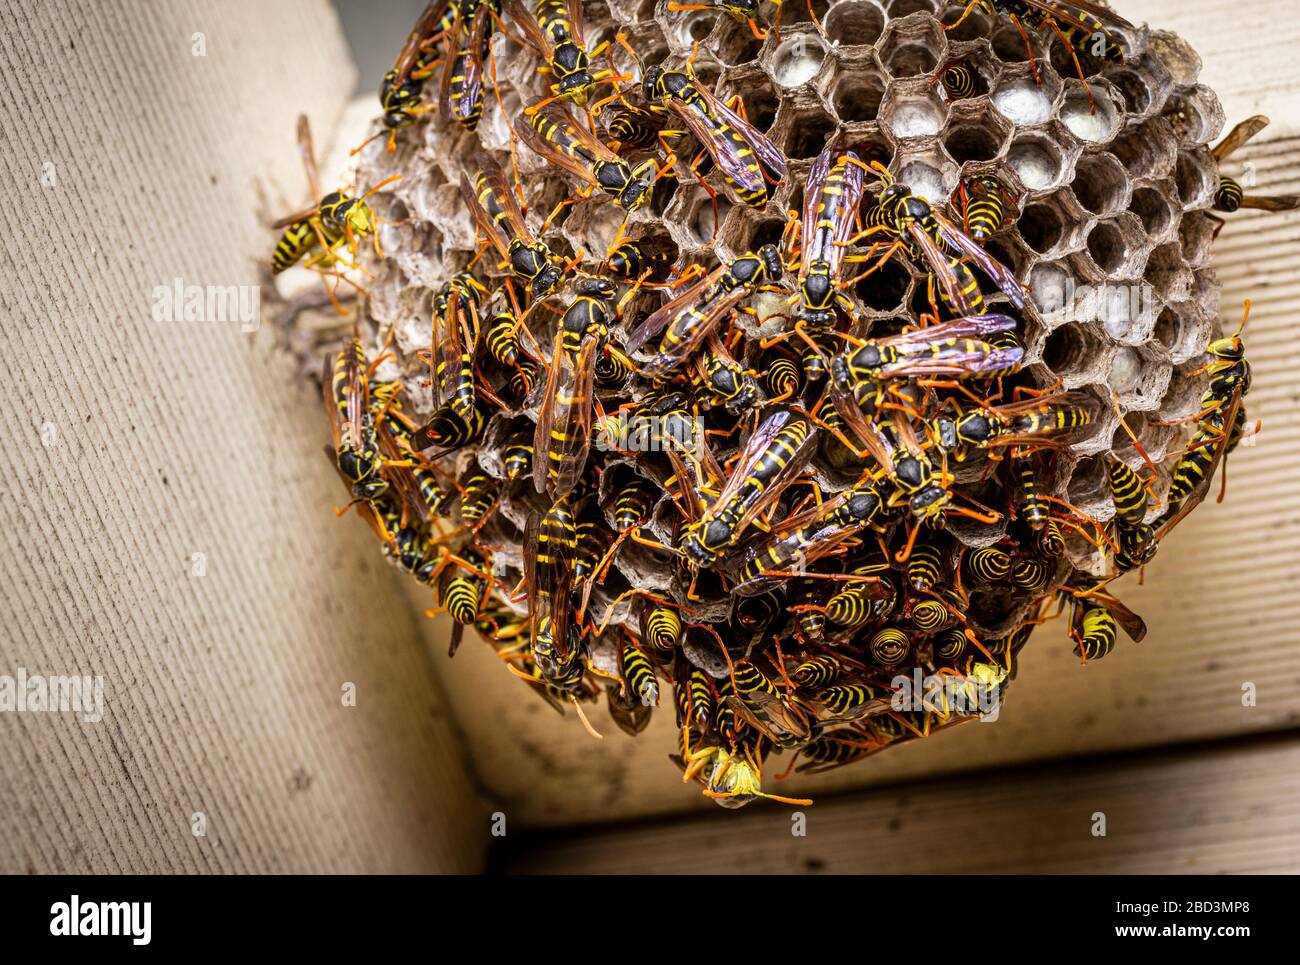 Close up of a European paper wasps (Polistes dominulus) nest in wooden roof, NSW Australia Stock Photo